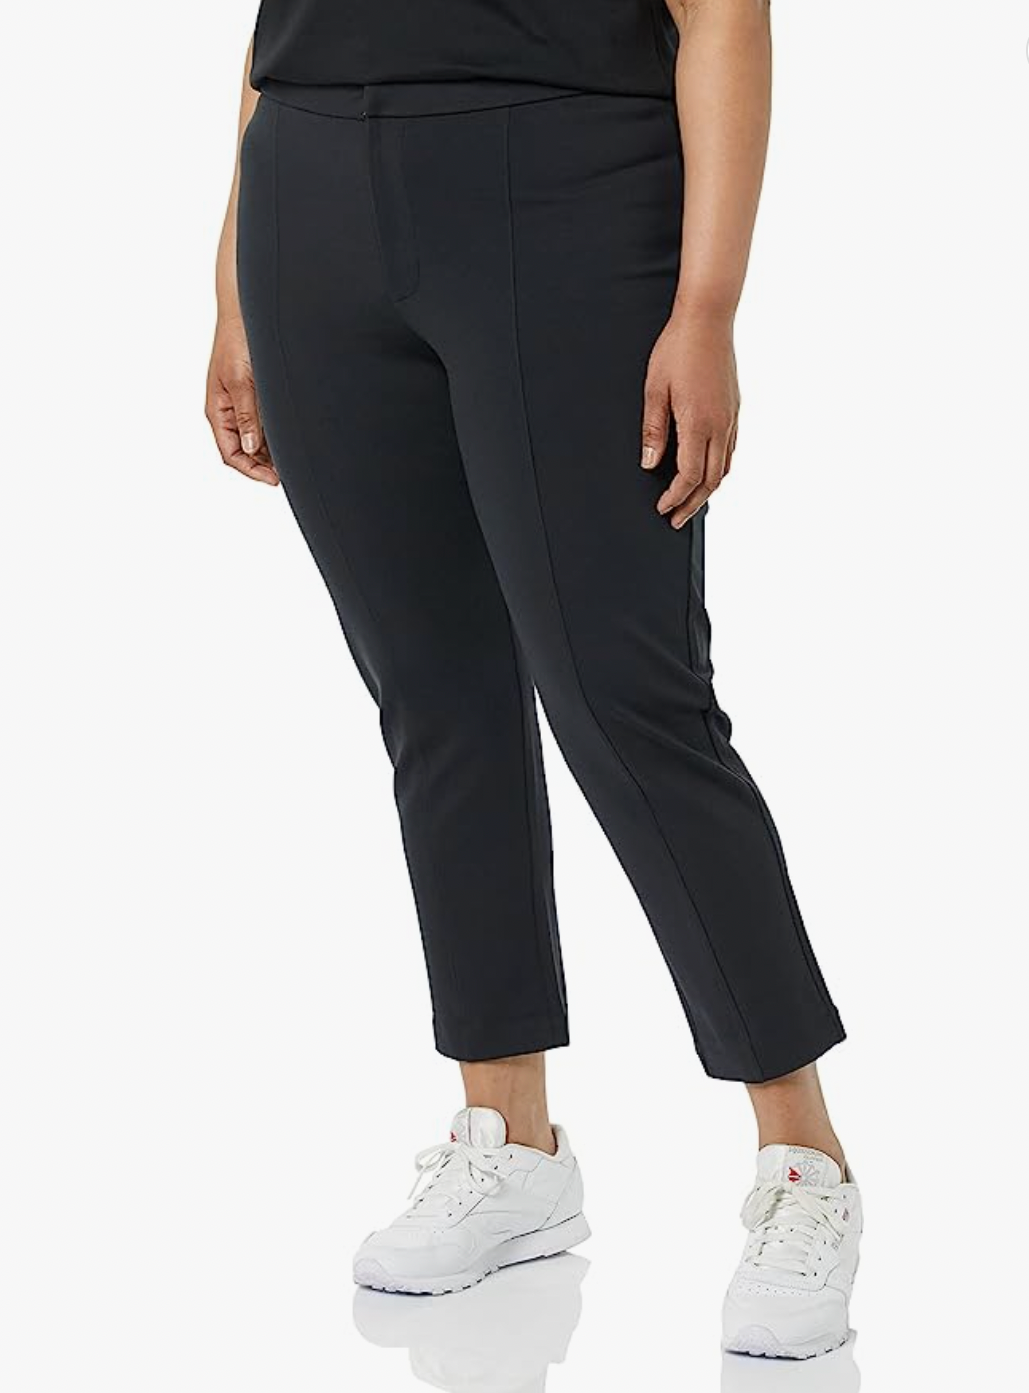 18 of the Best Work Pants for Women in 2023